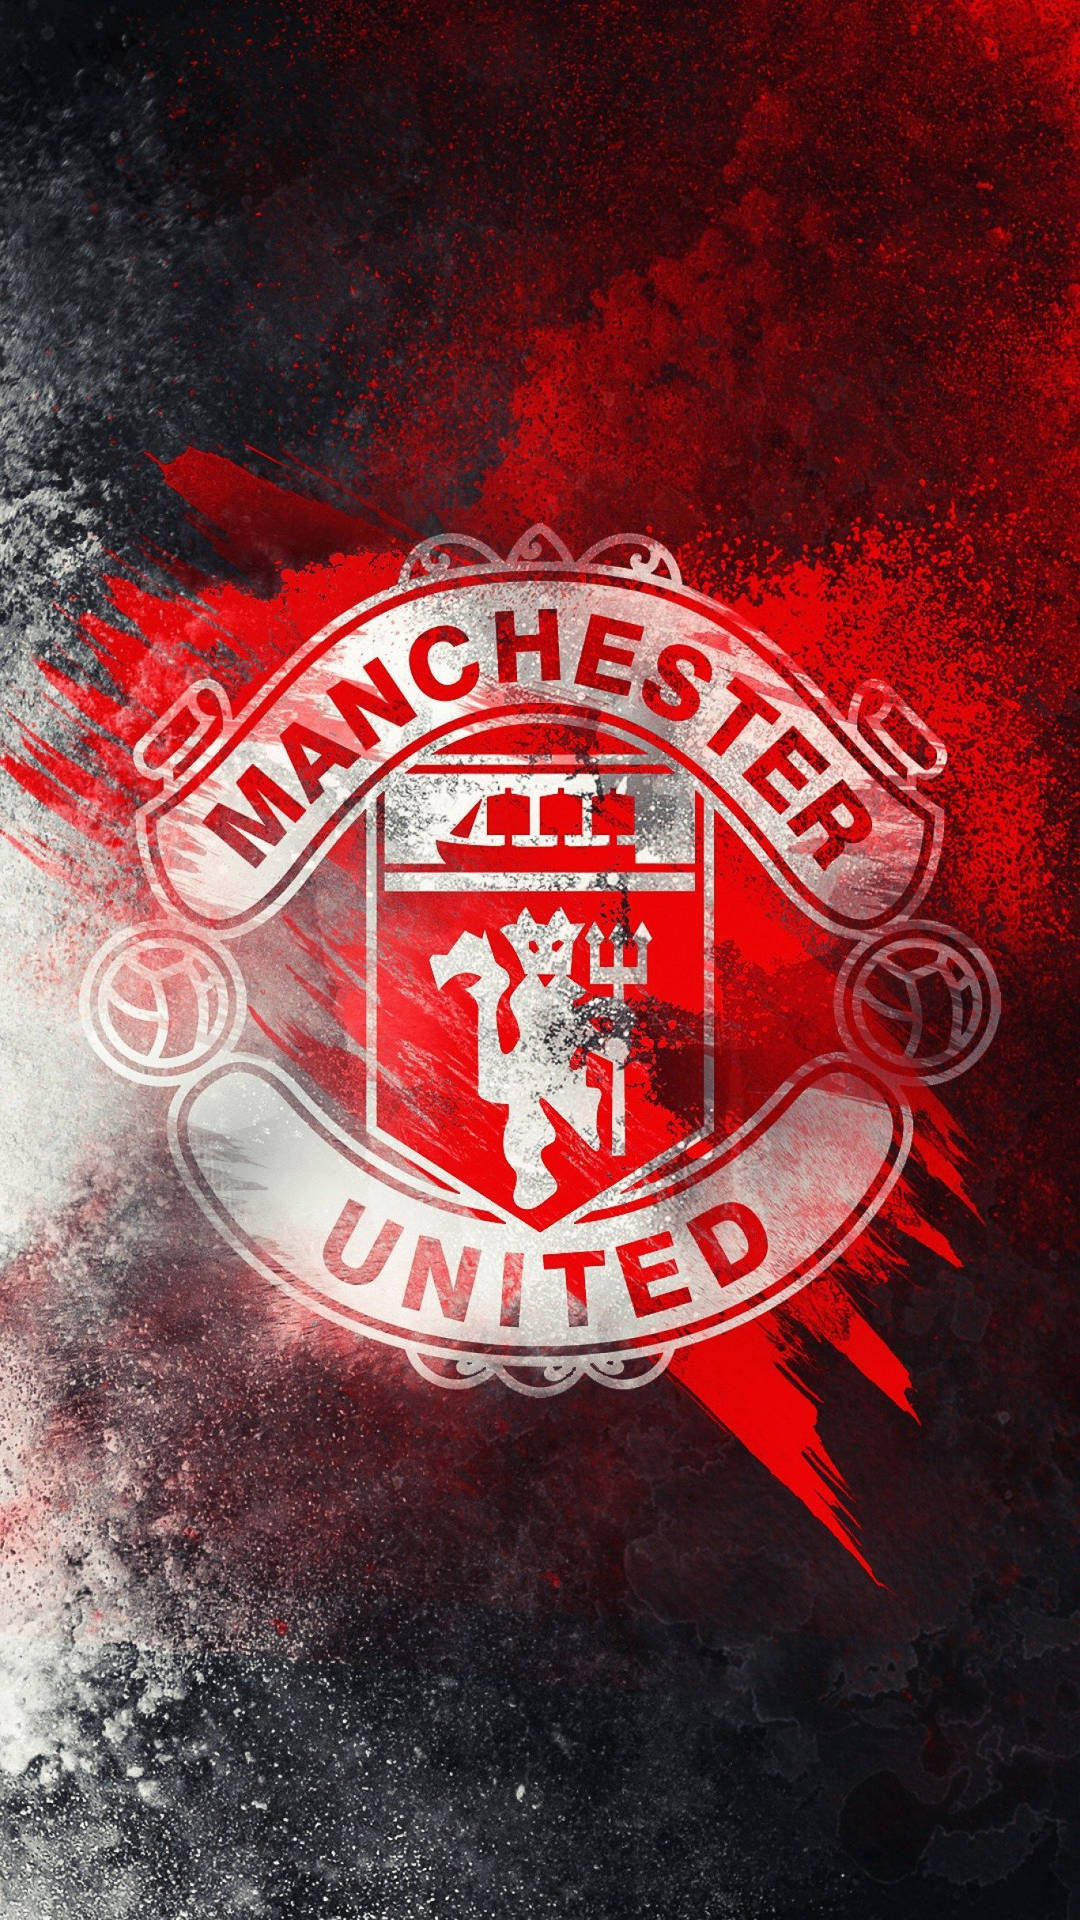 Free Manchester United Wallpaper Downloads 400 Manchester United  Wallpapers for FREE  Wallpaperscom